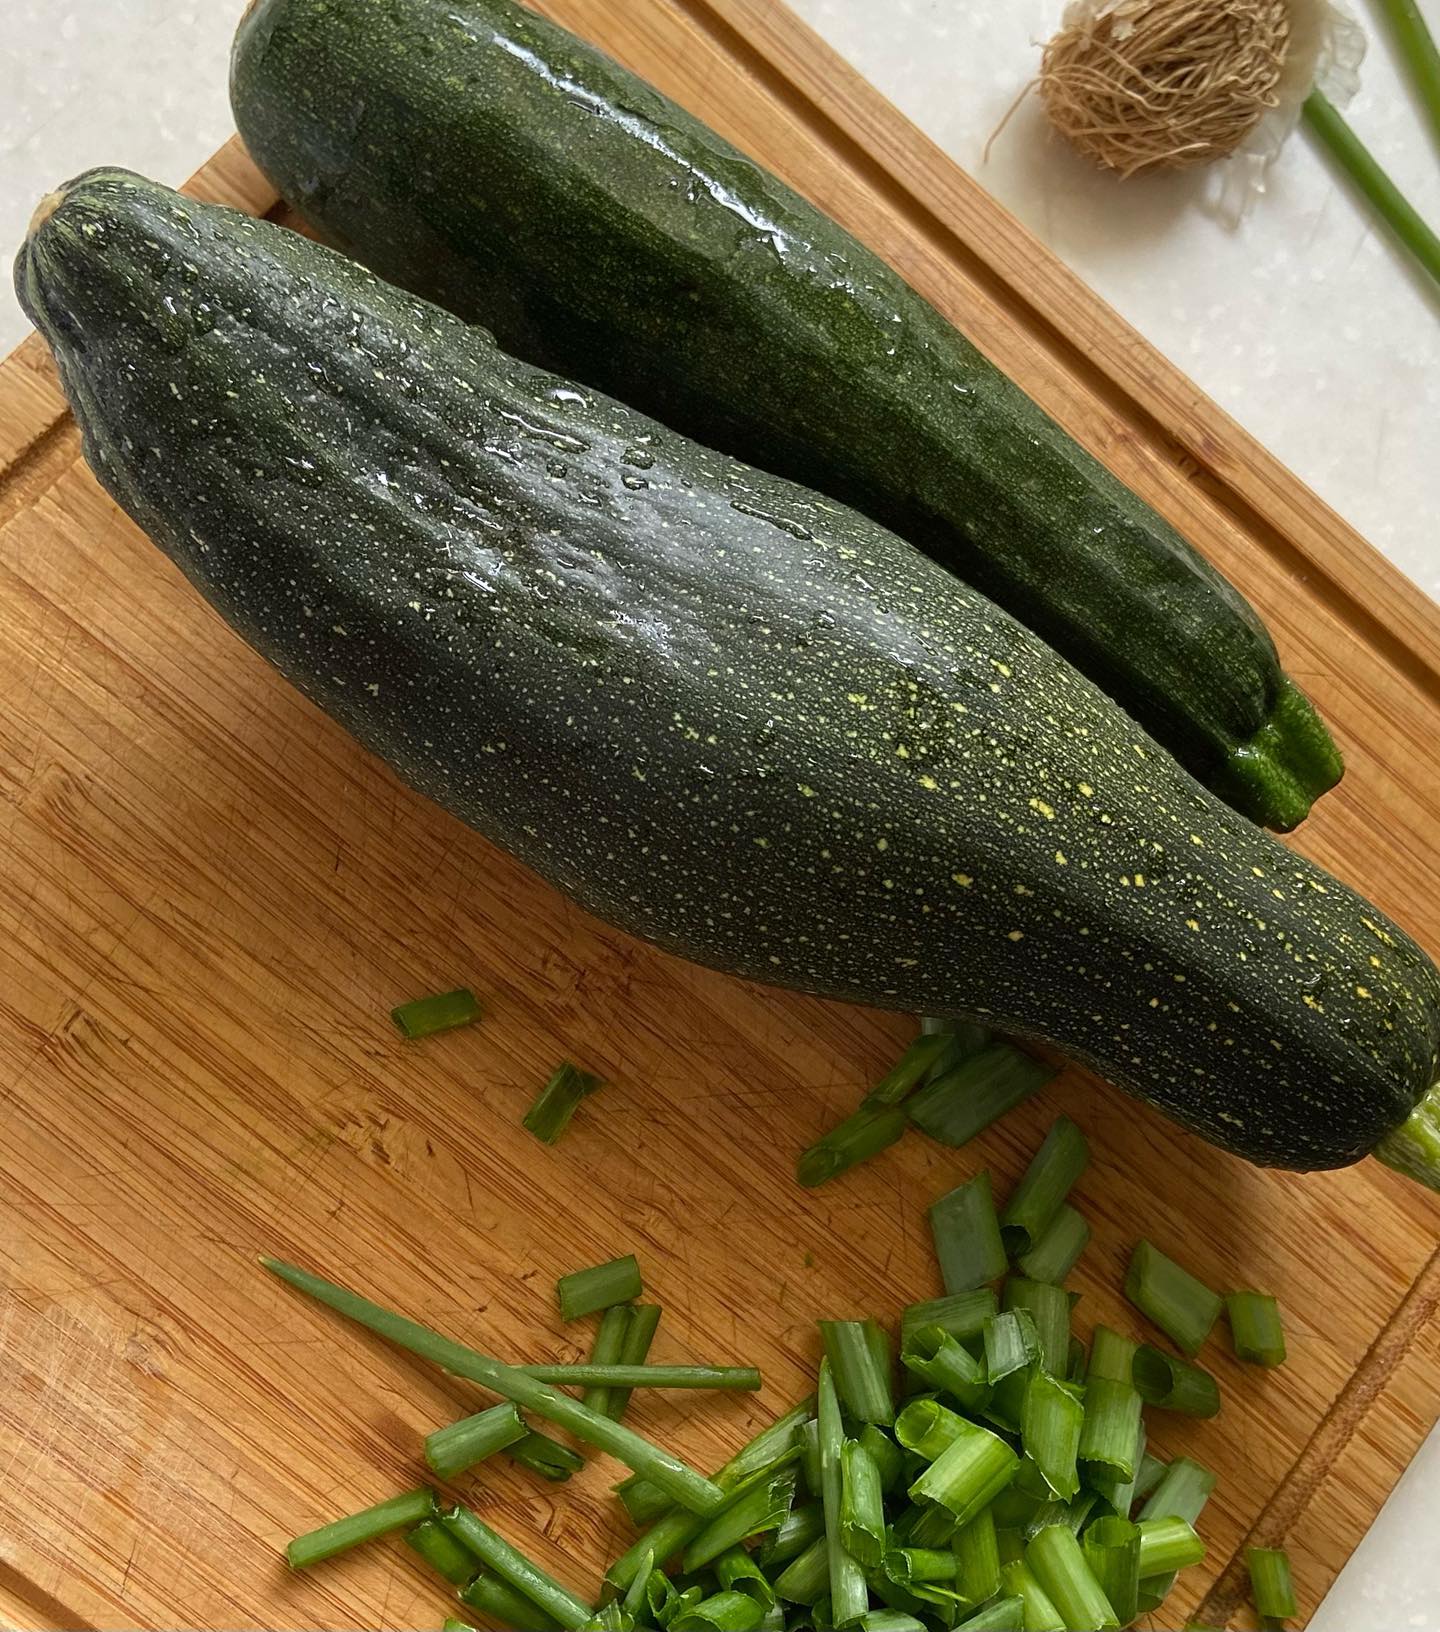 One is home grown, the other commercially grown. Has programming around perfection altered our senses? How often do you look for the perfectly shaped zucchini, tomato or apple? Should it matter the shape when it tastes just as good (if not better) and grown with love? #garden #farmacy #programofperfection